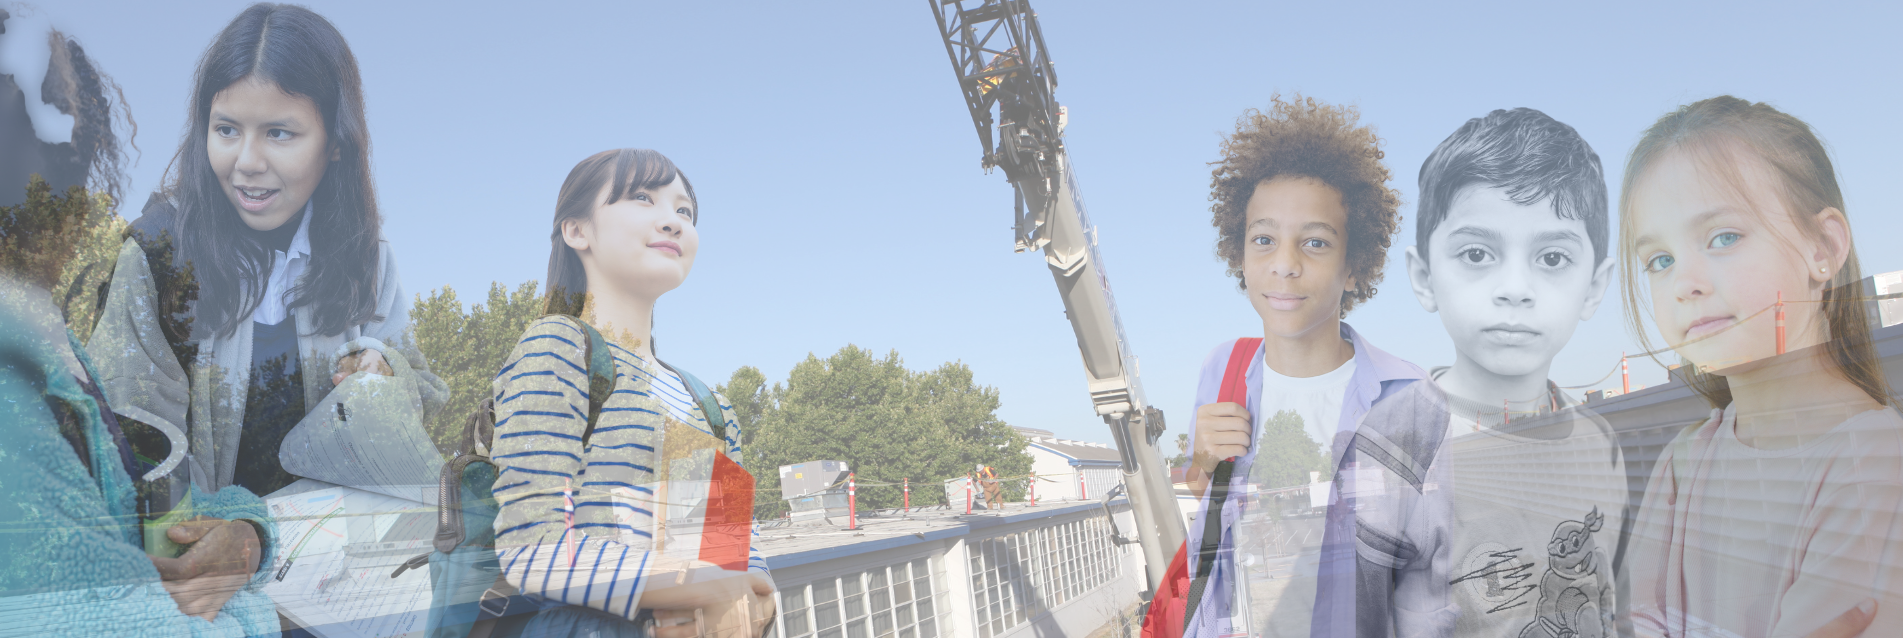 students and construction crane